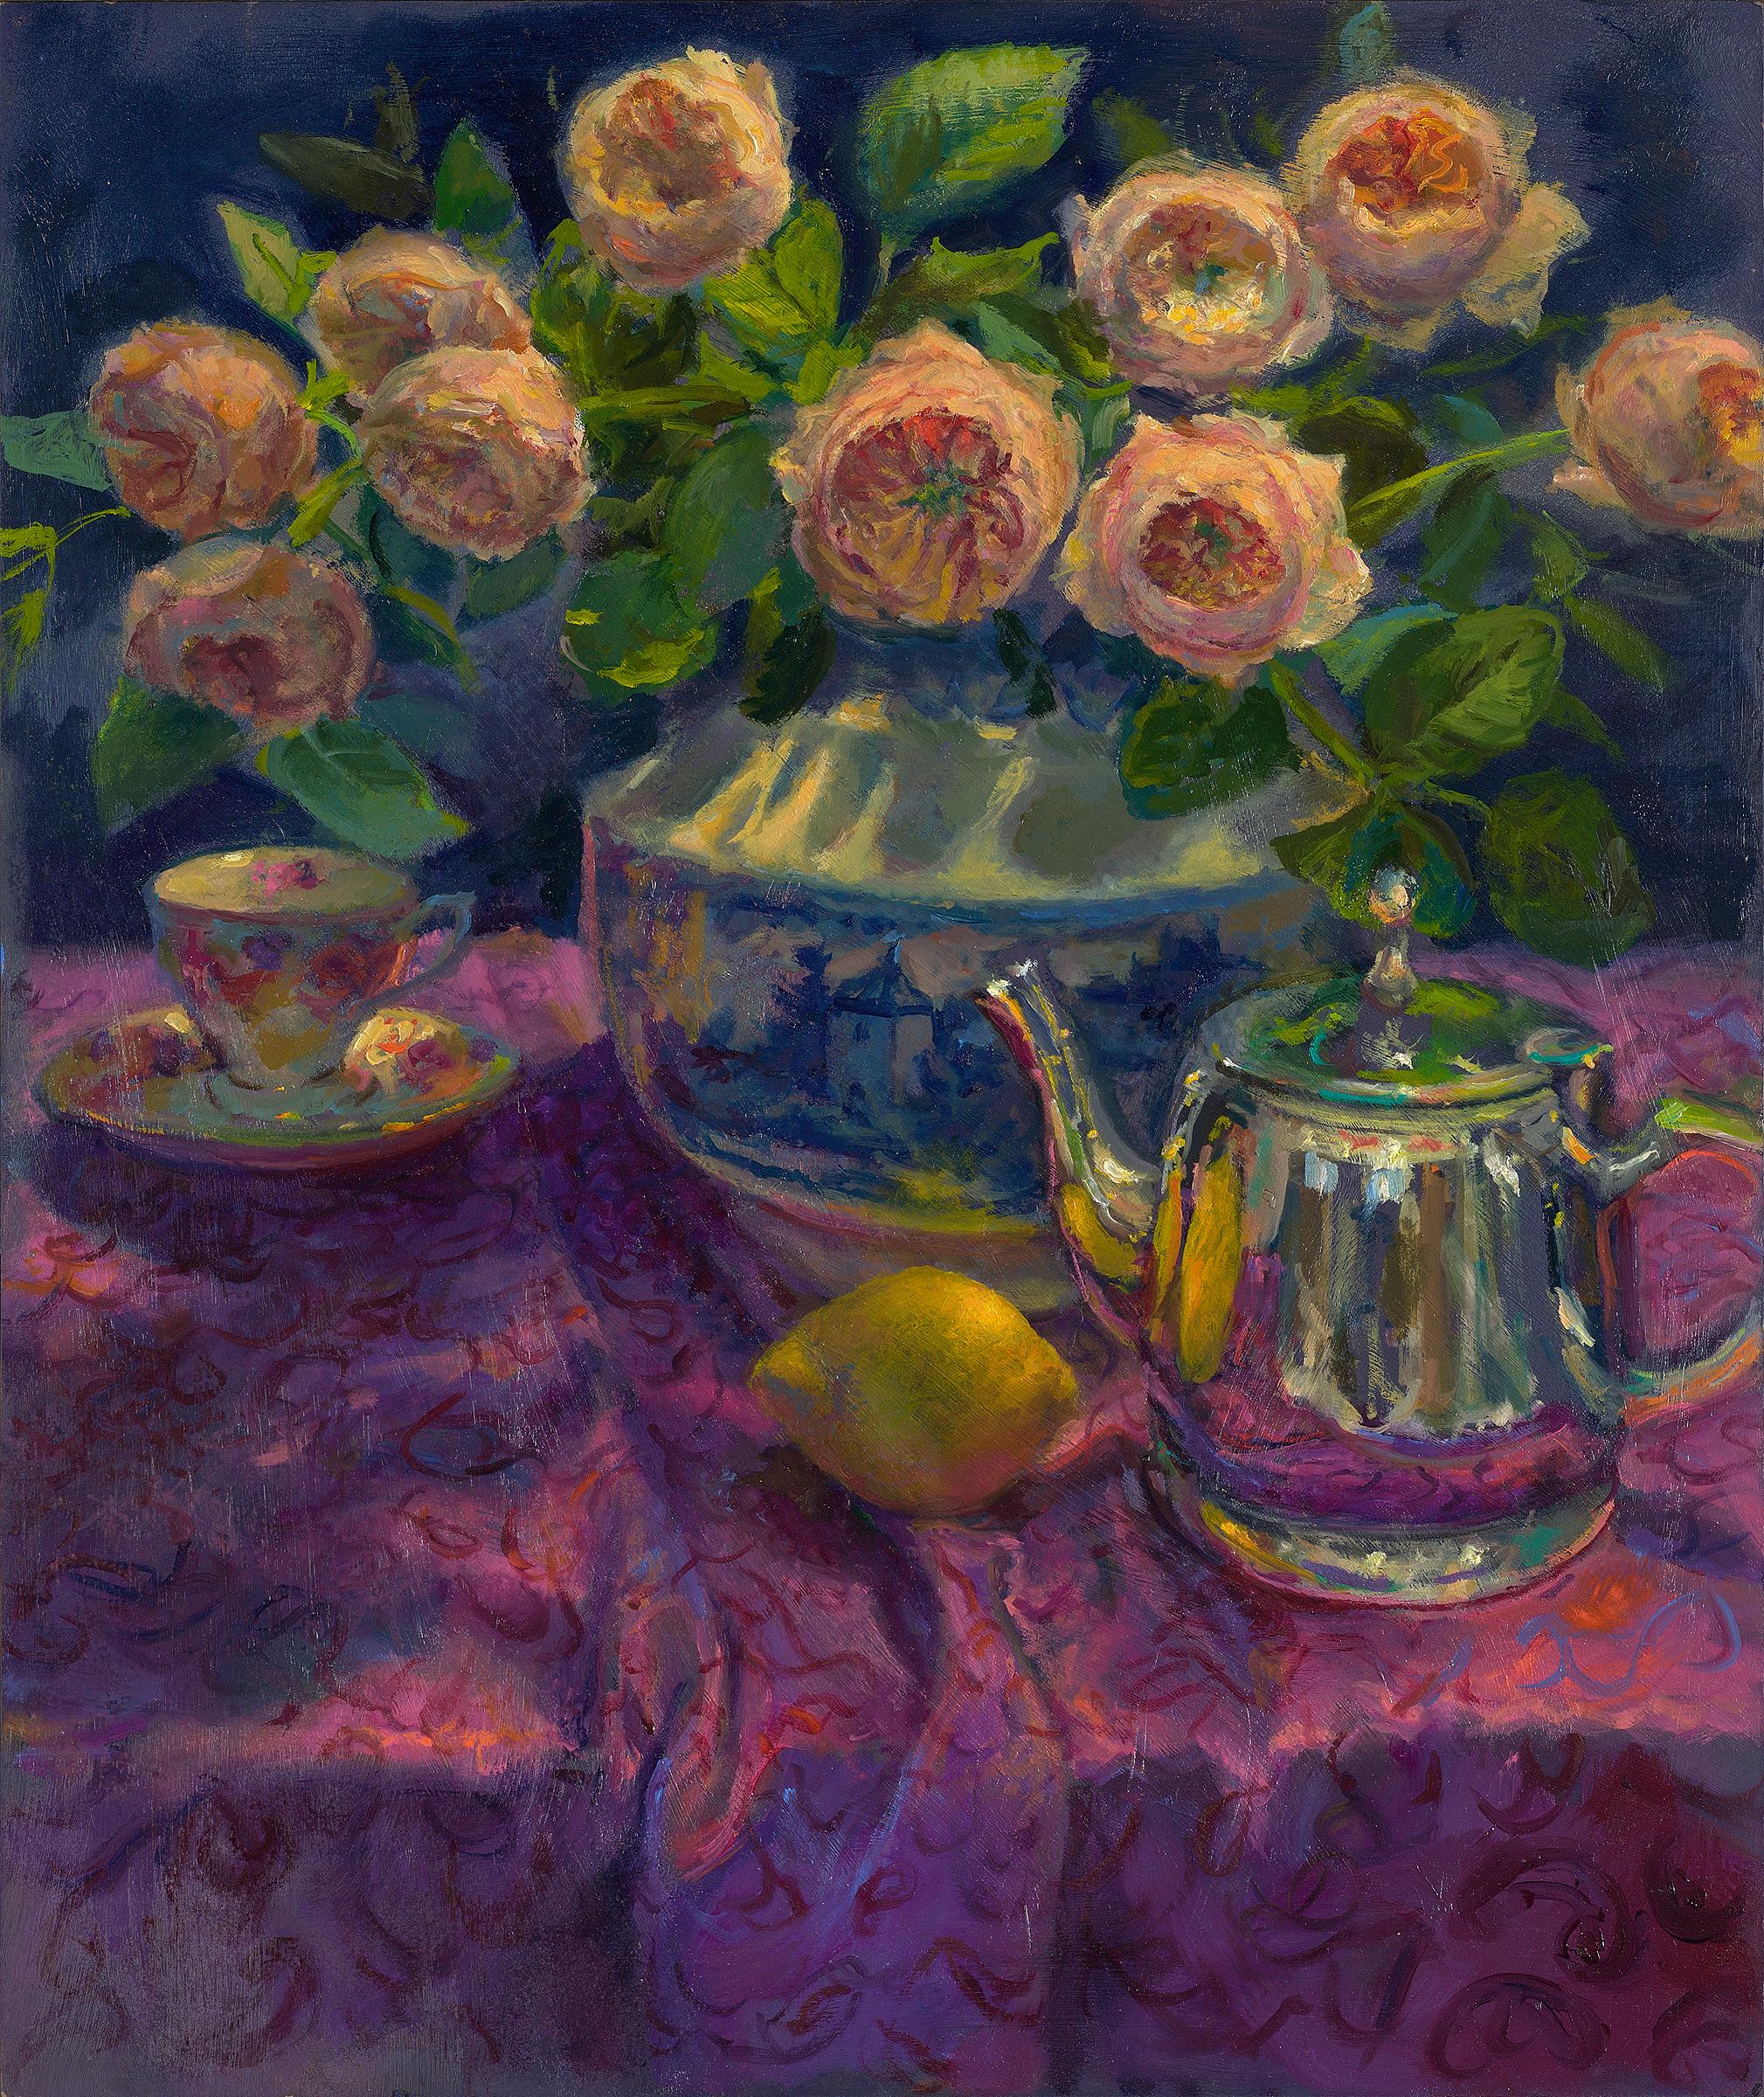 Keimpe van der - 21st Century Contemporary Dutch Flower Still-life with Roses For Sale at 1stDibs